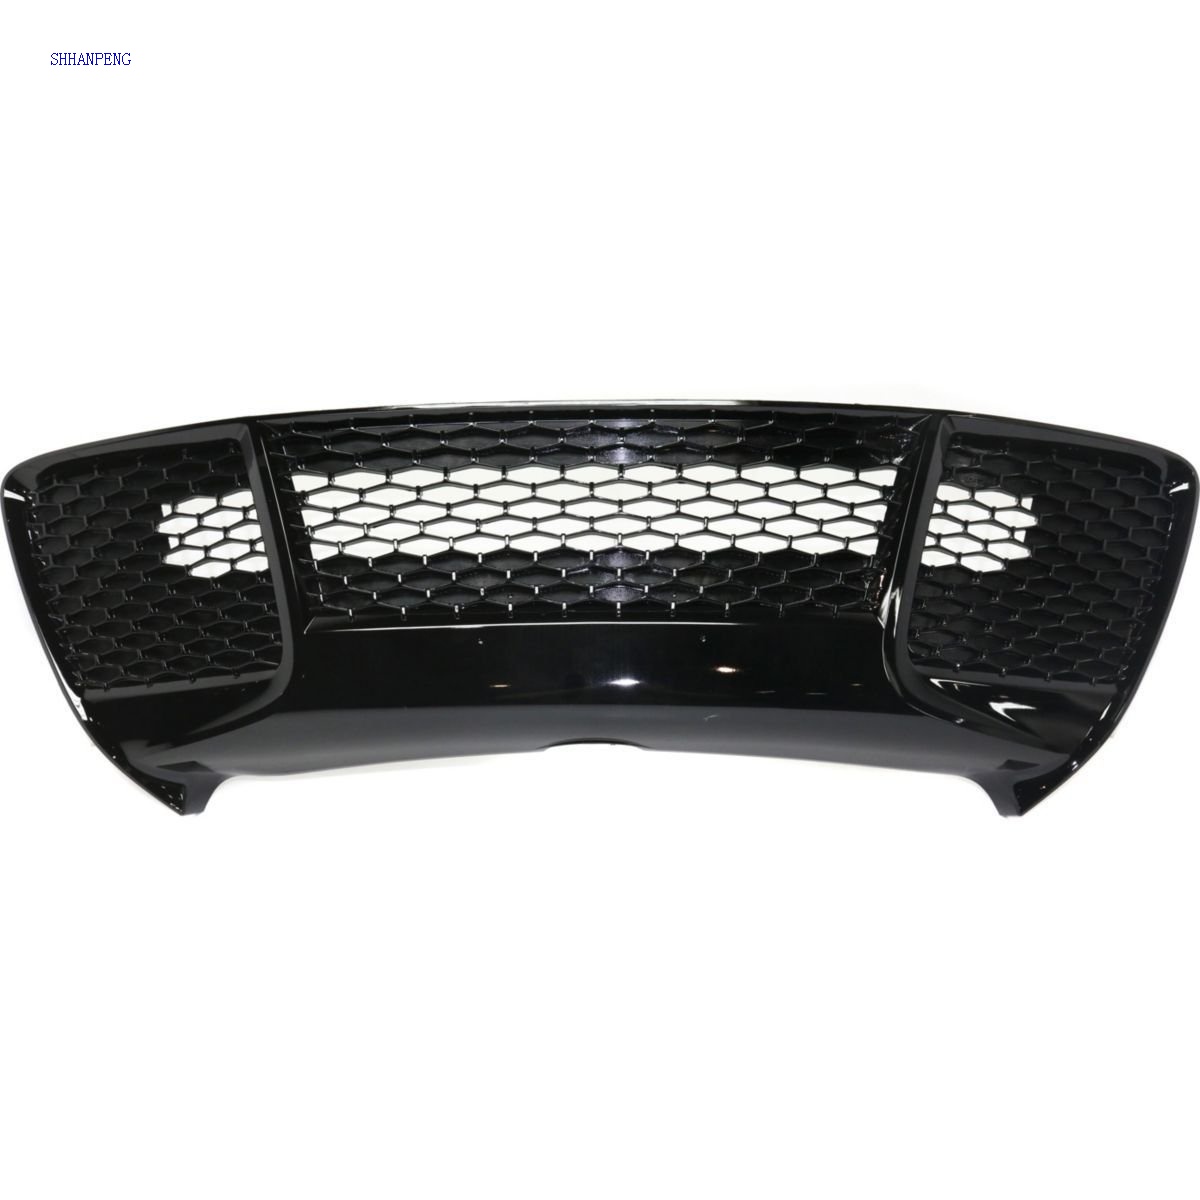 Grille Grill Assembly Front Lower TO1036156 For Toyota Camry